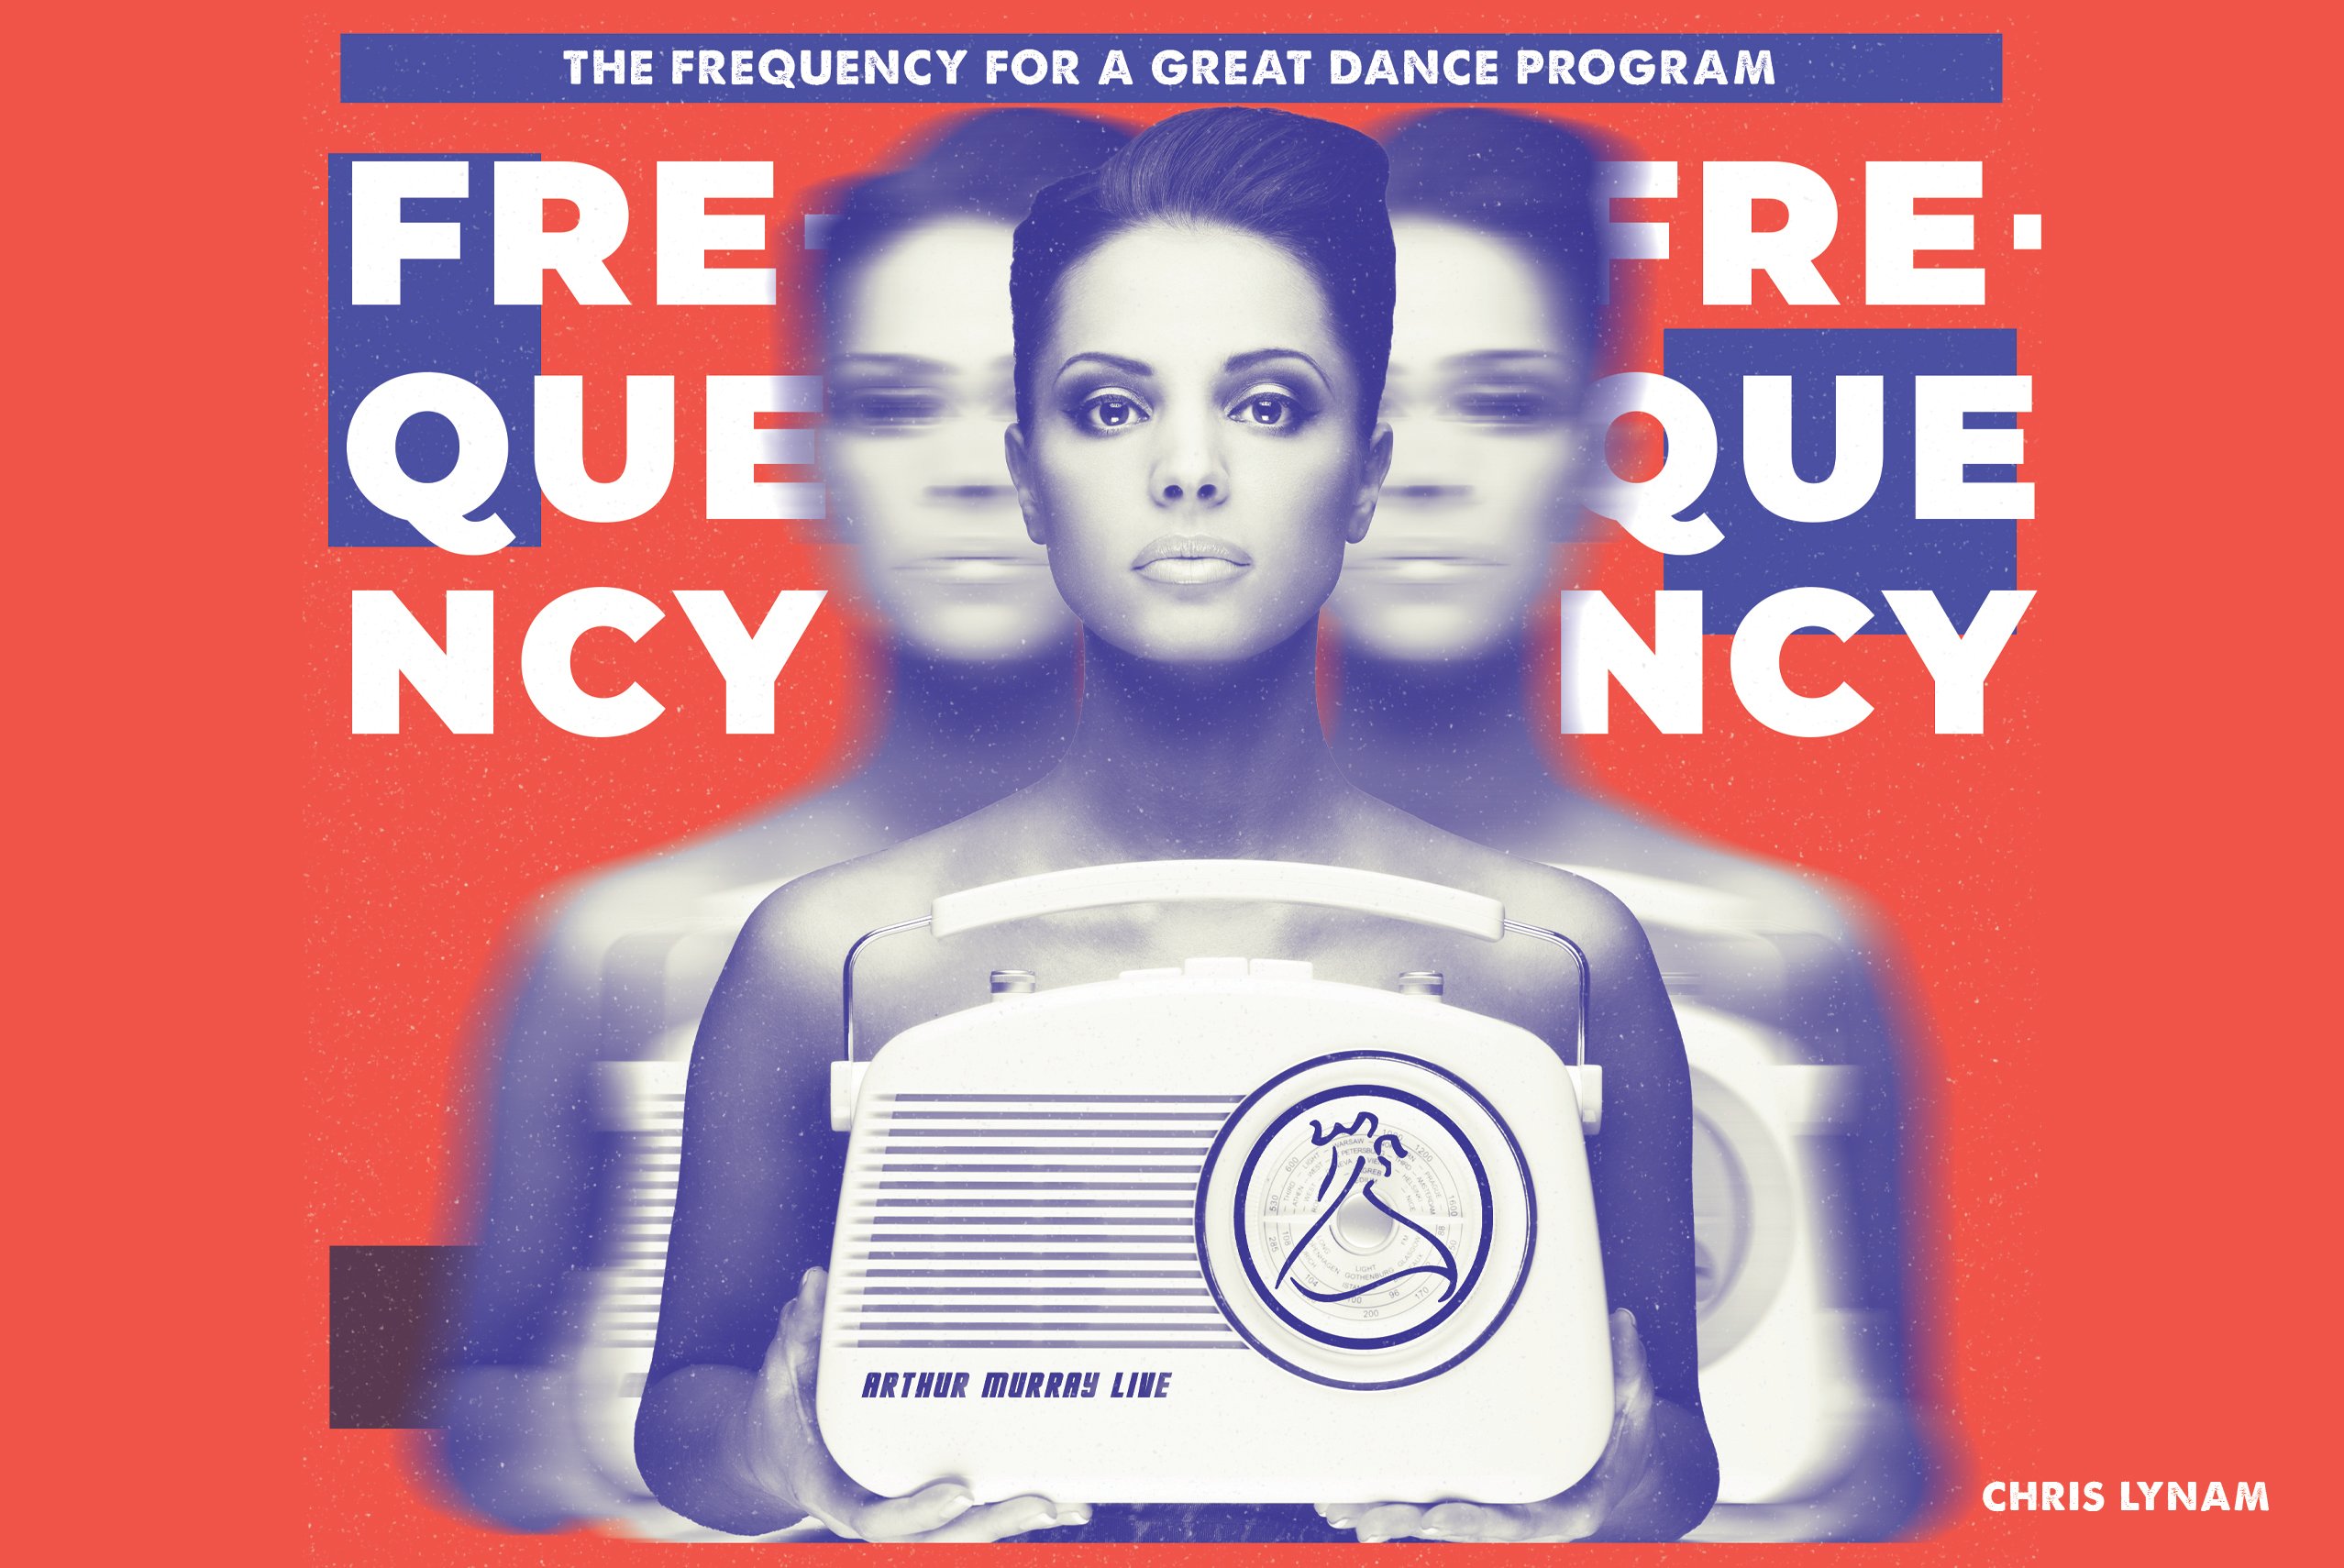 The Frequency for a Great Dance Program